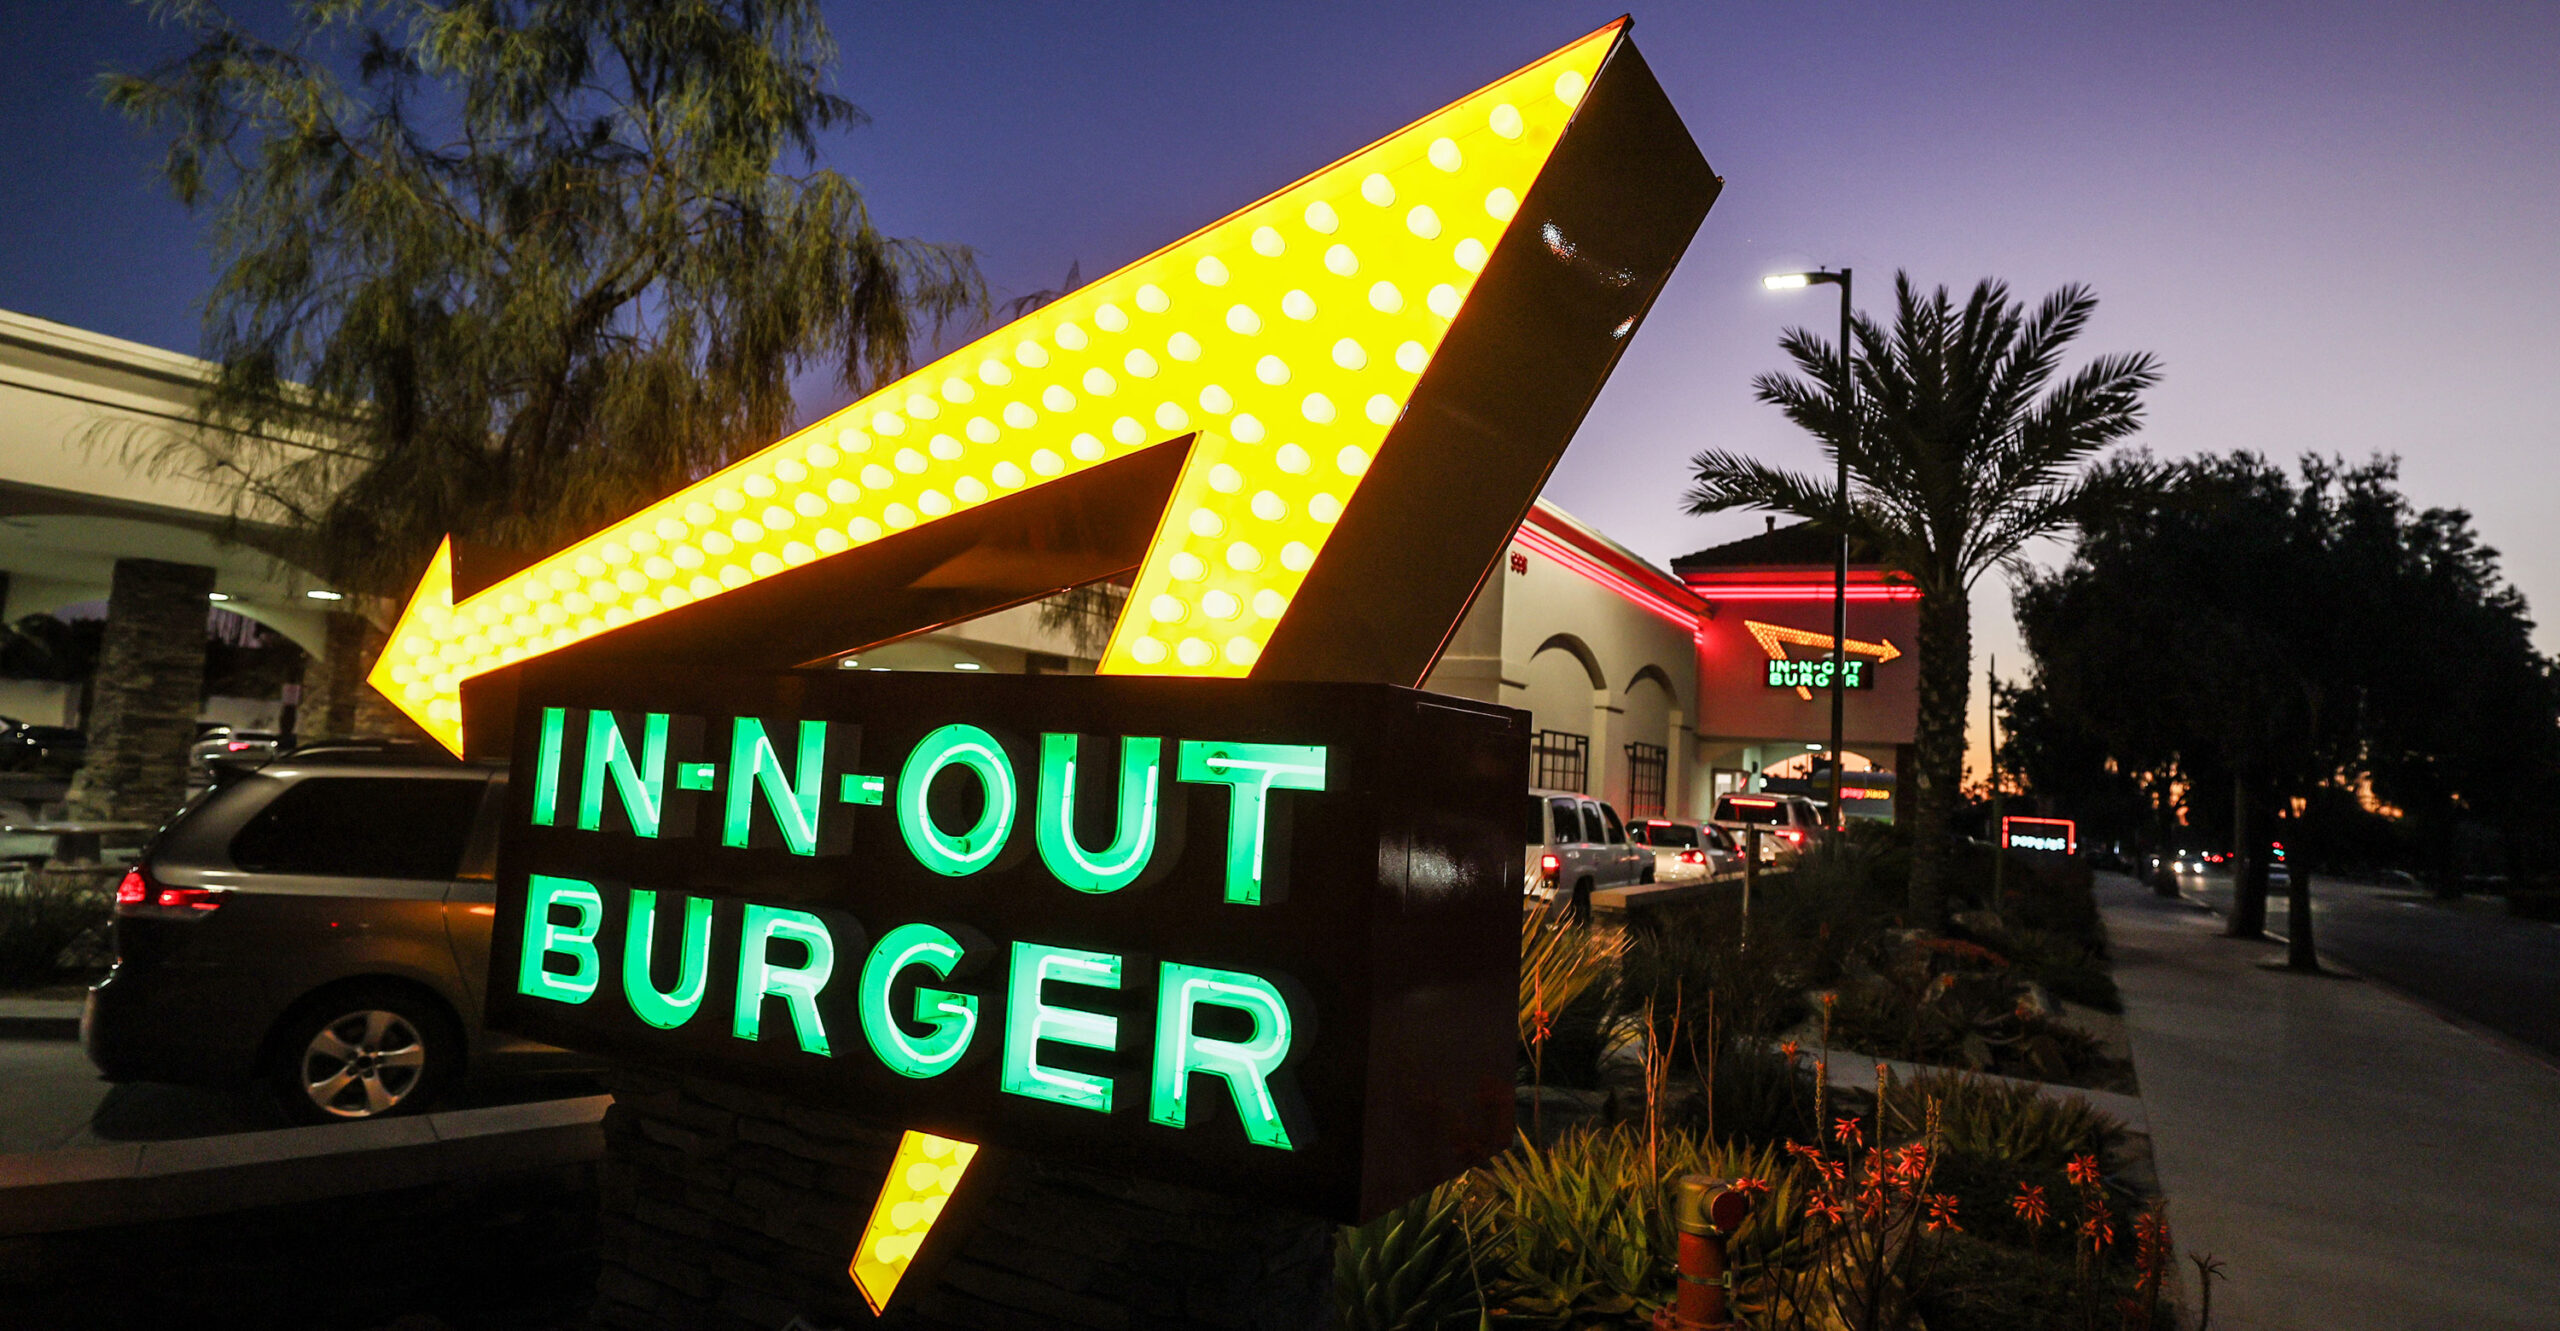 SOCIETAL ROT, Part 2: In-N-Out Burger Restaurant a Casualty of Prosecutor's Failures